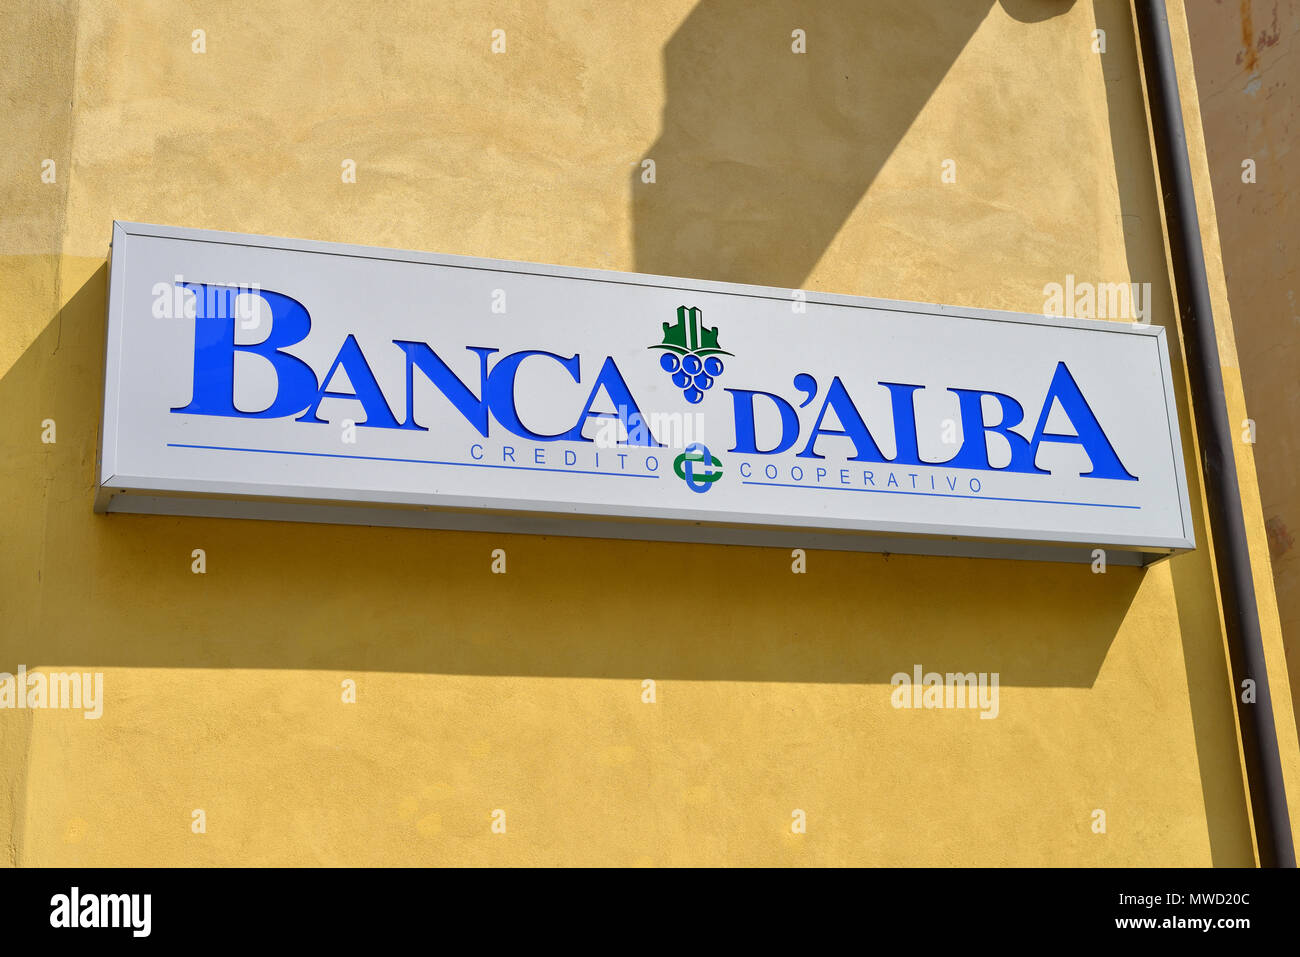 Banca D'Alba Plate on a branch in Barolo, italy Stock Photo